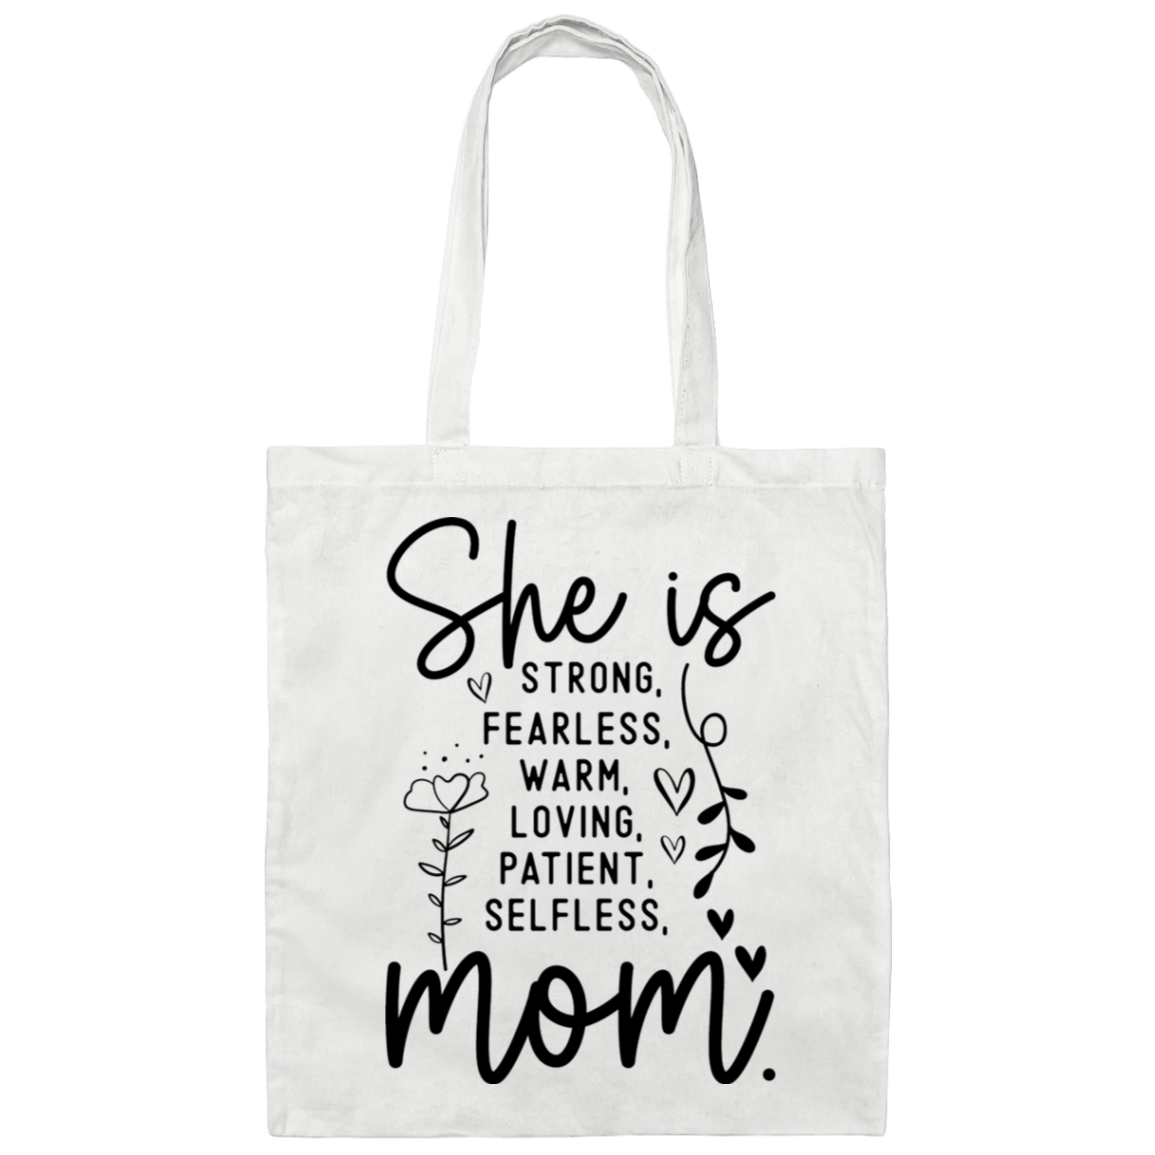 She is ... Canvas Tote Bag